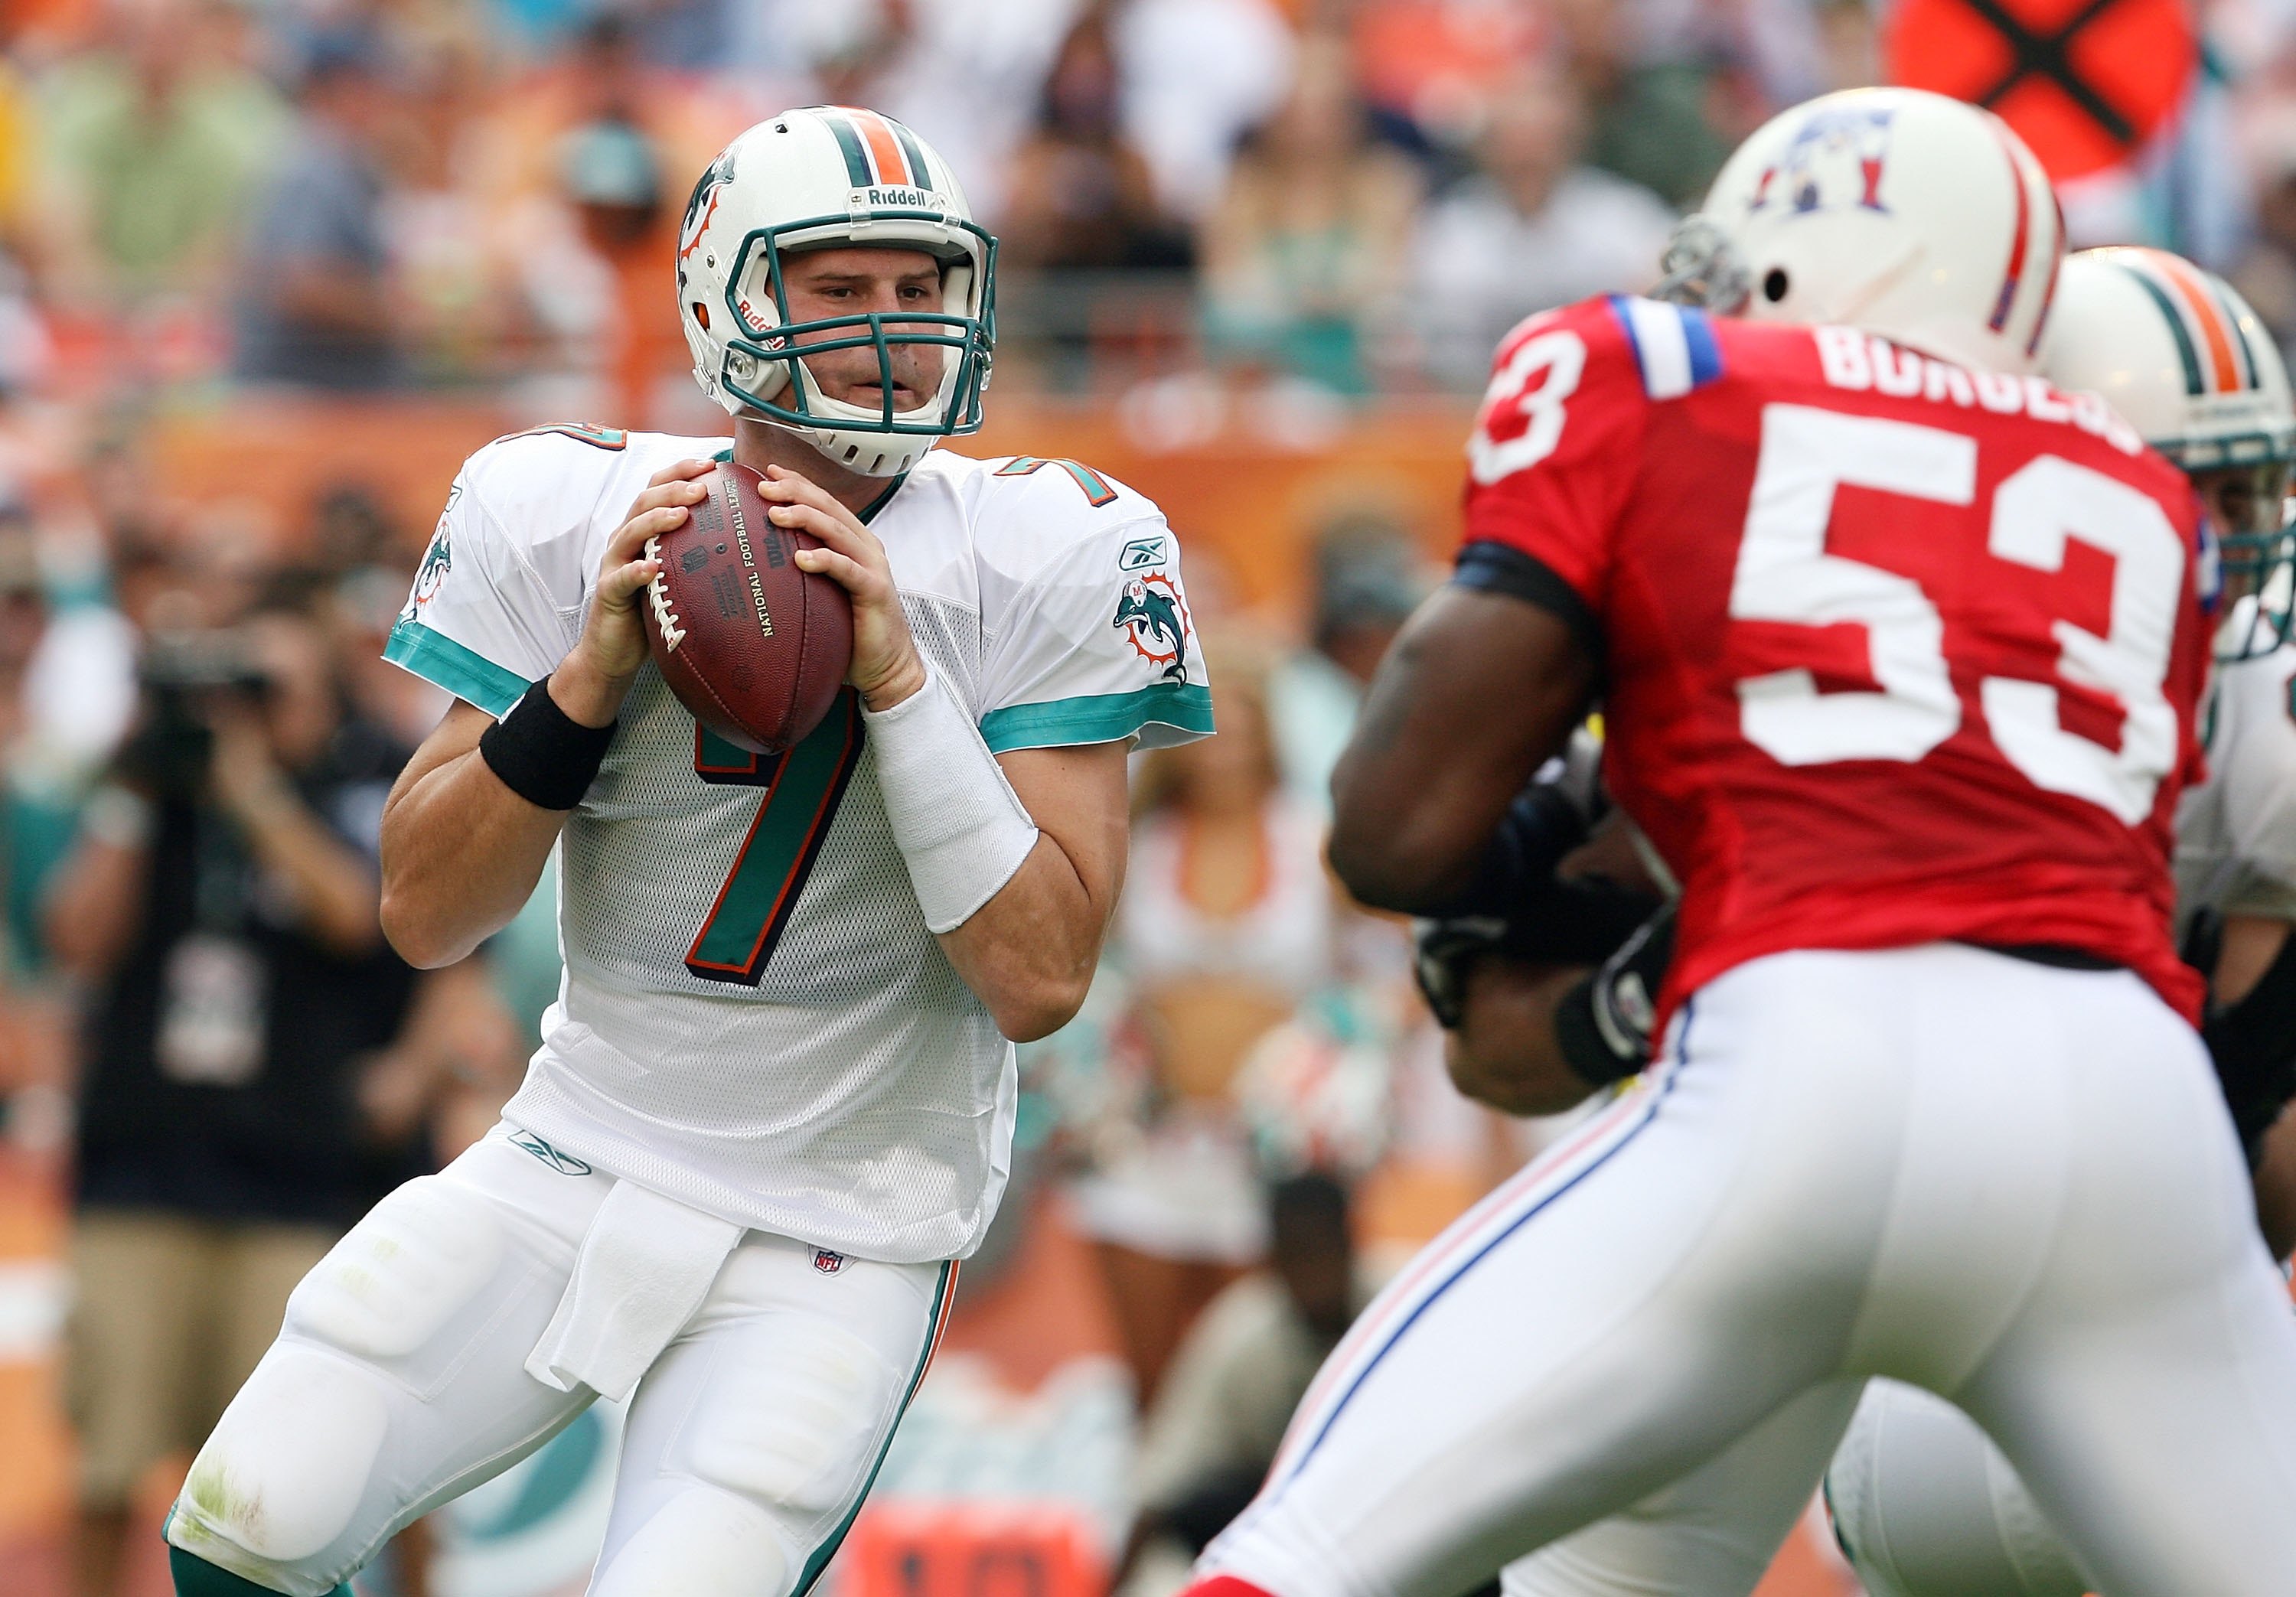 Miami Dolphins vs. New England Patriots: Date, kick-off time